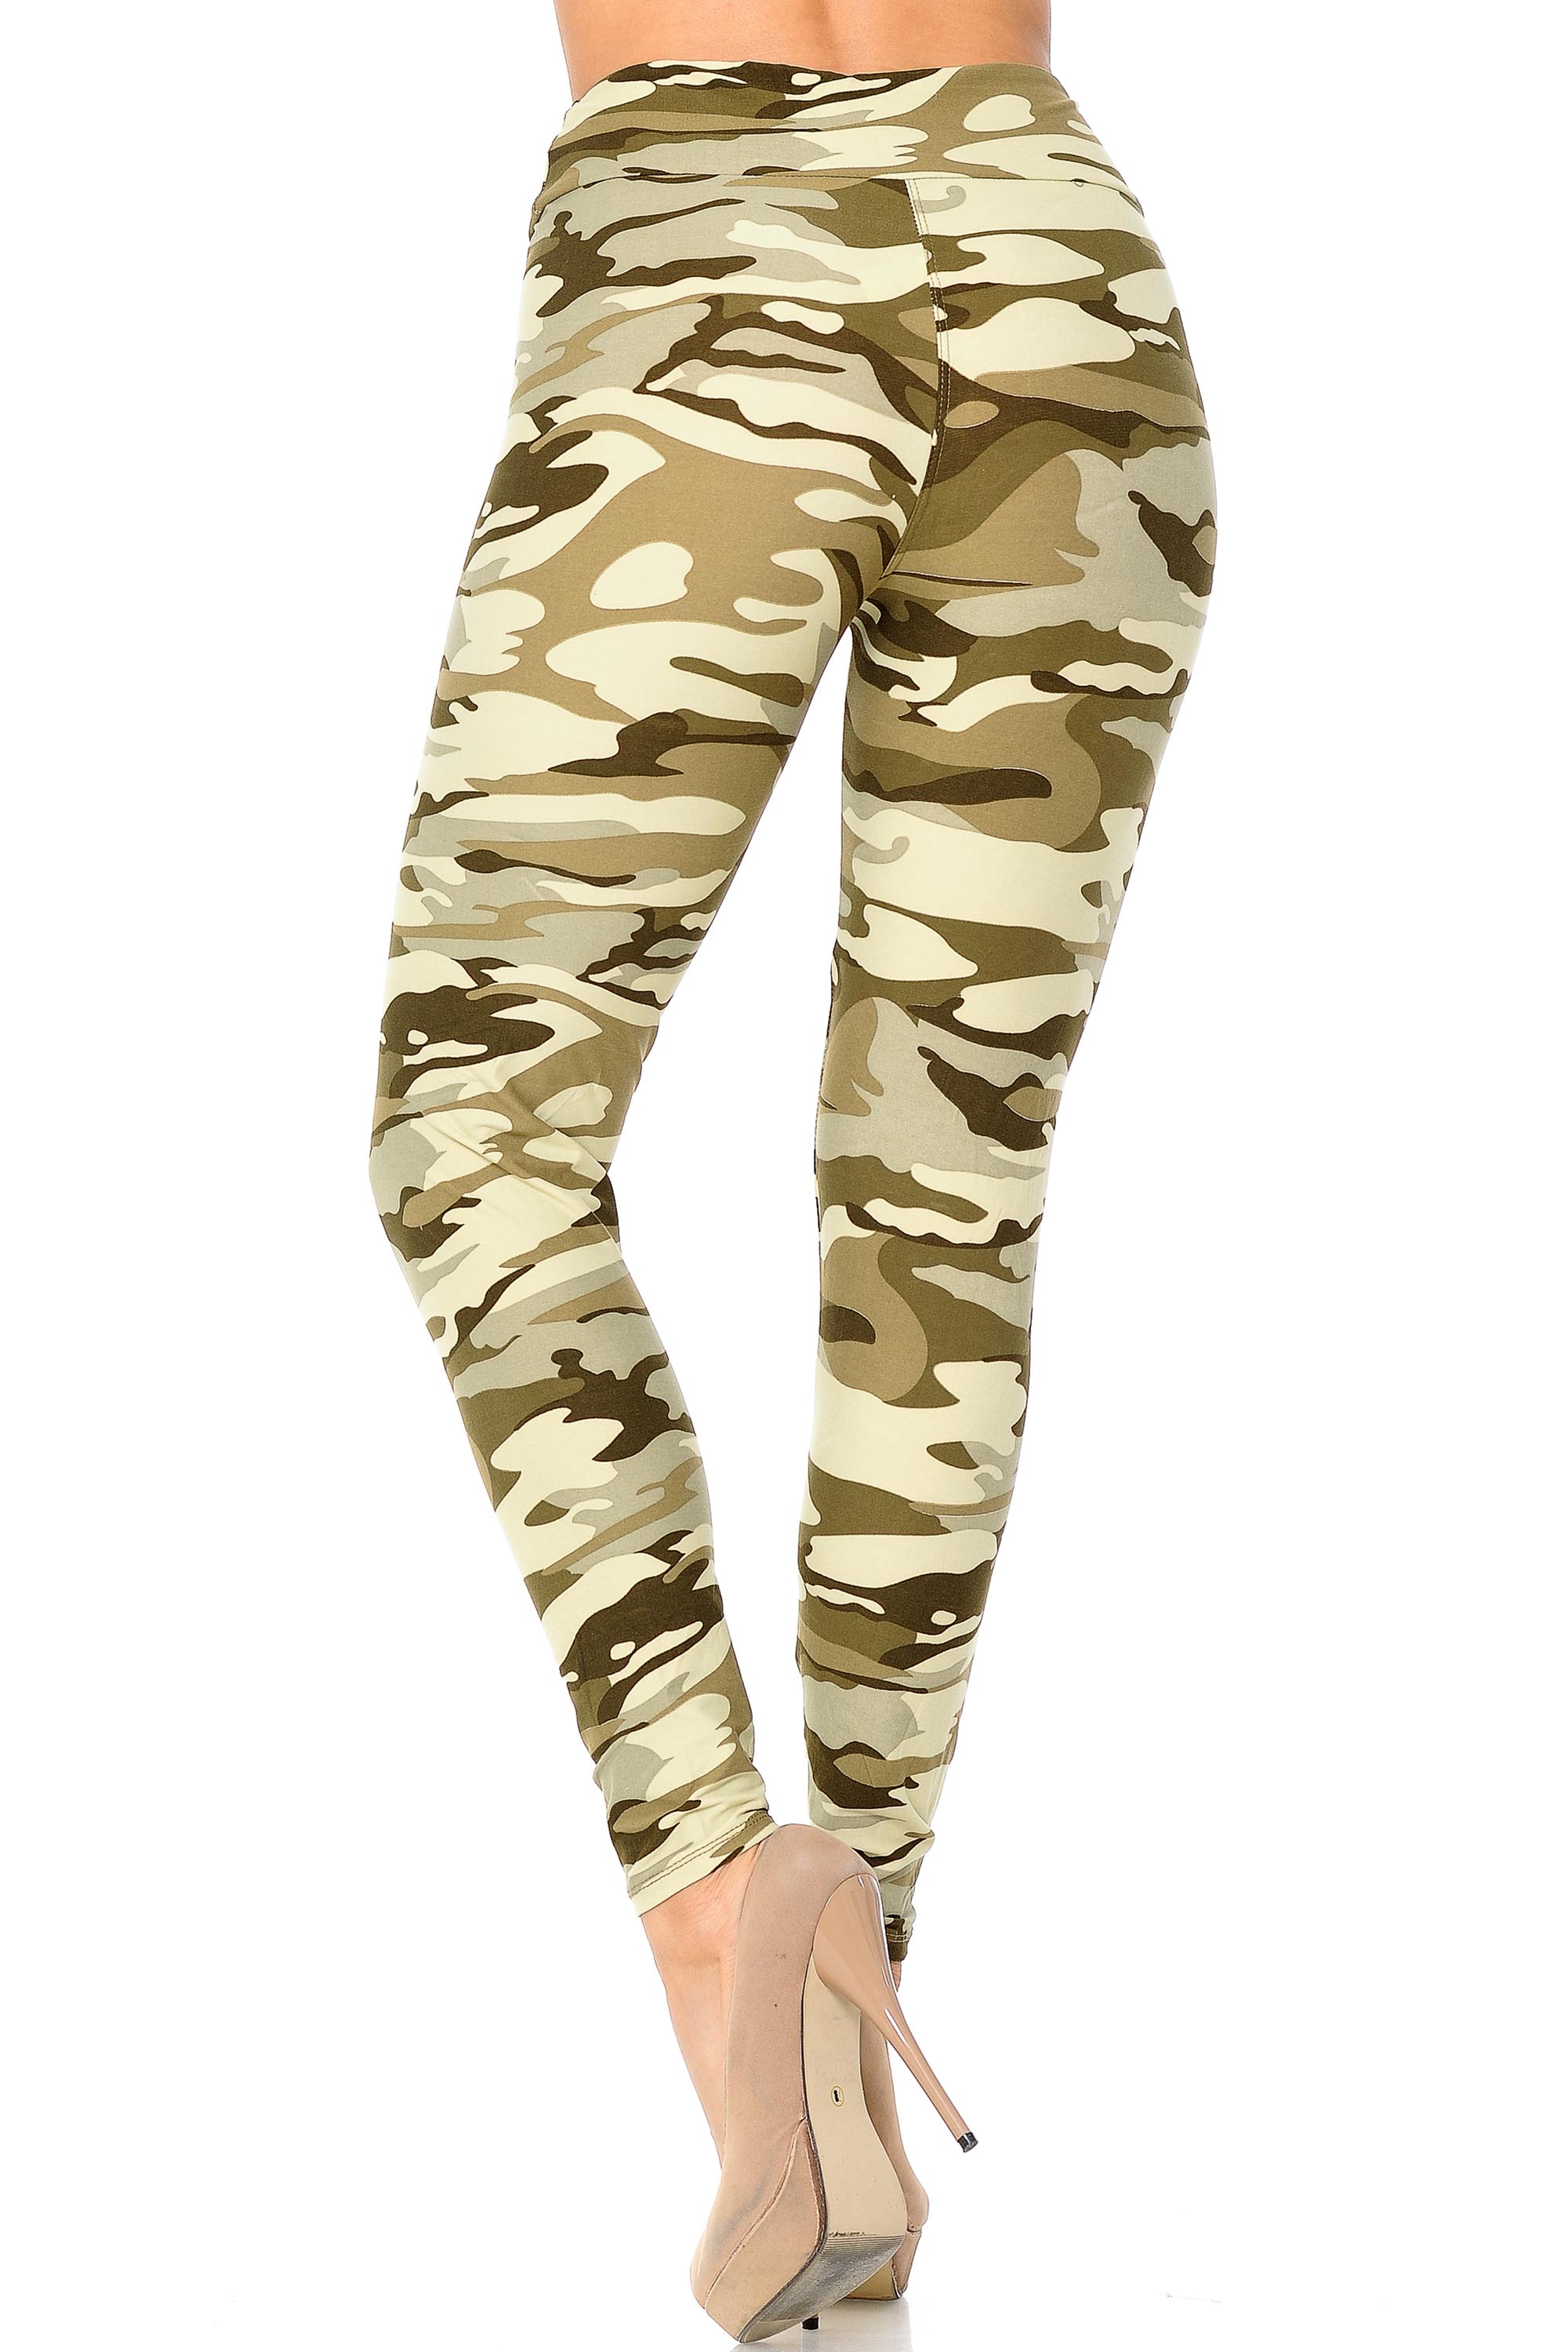 Wholesale Buttery Smooth Light Olive Camouflage High Waisted Plus Size Leggings